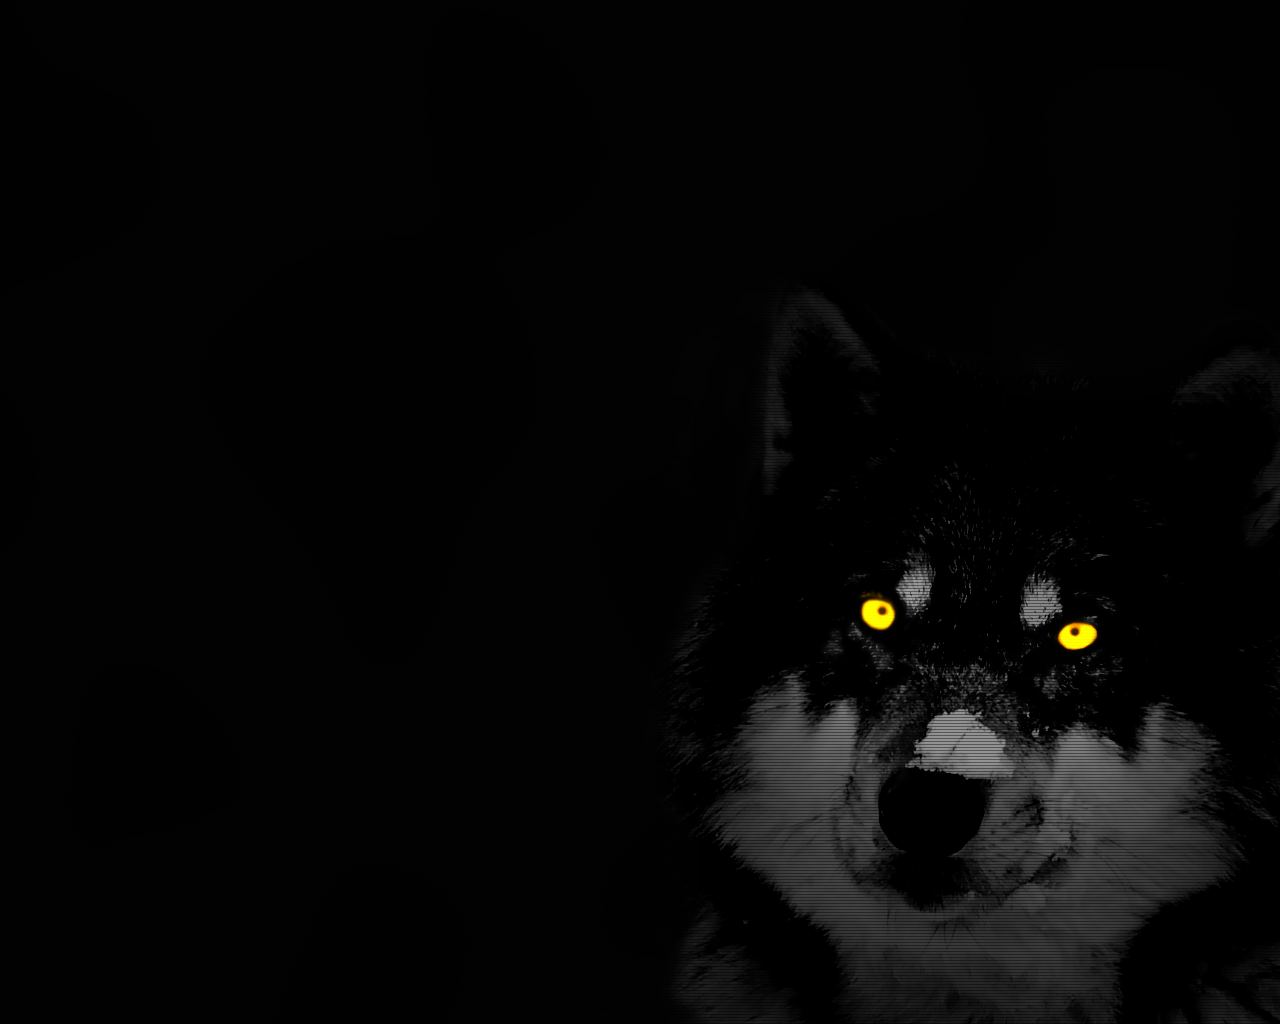 wolf picture with black background. Windows 10 arrives on July 29